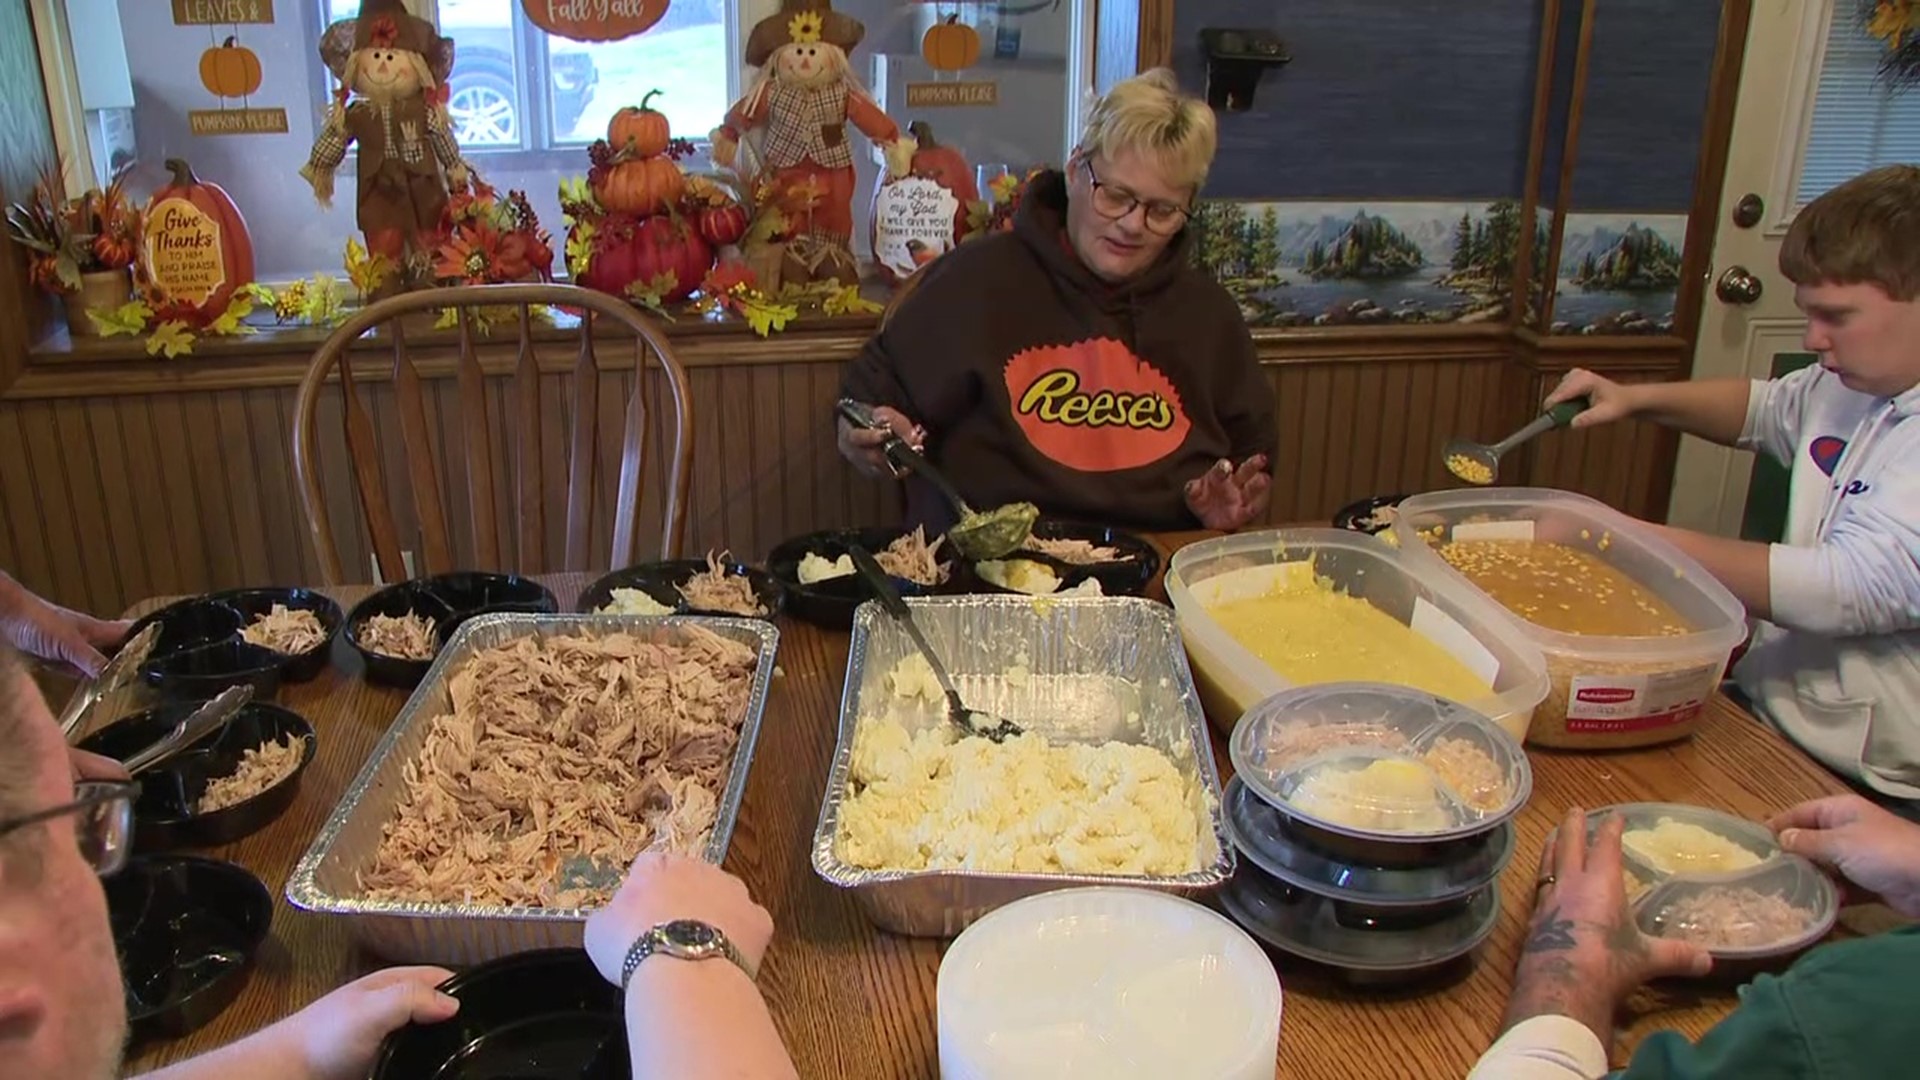 A family from Snyder County is paying it forward this Thanksgiving by preparing dozens of meals for people in their community.